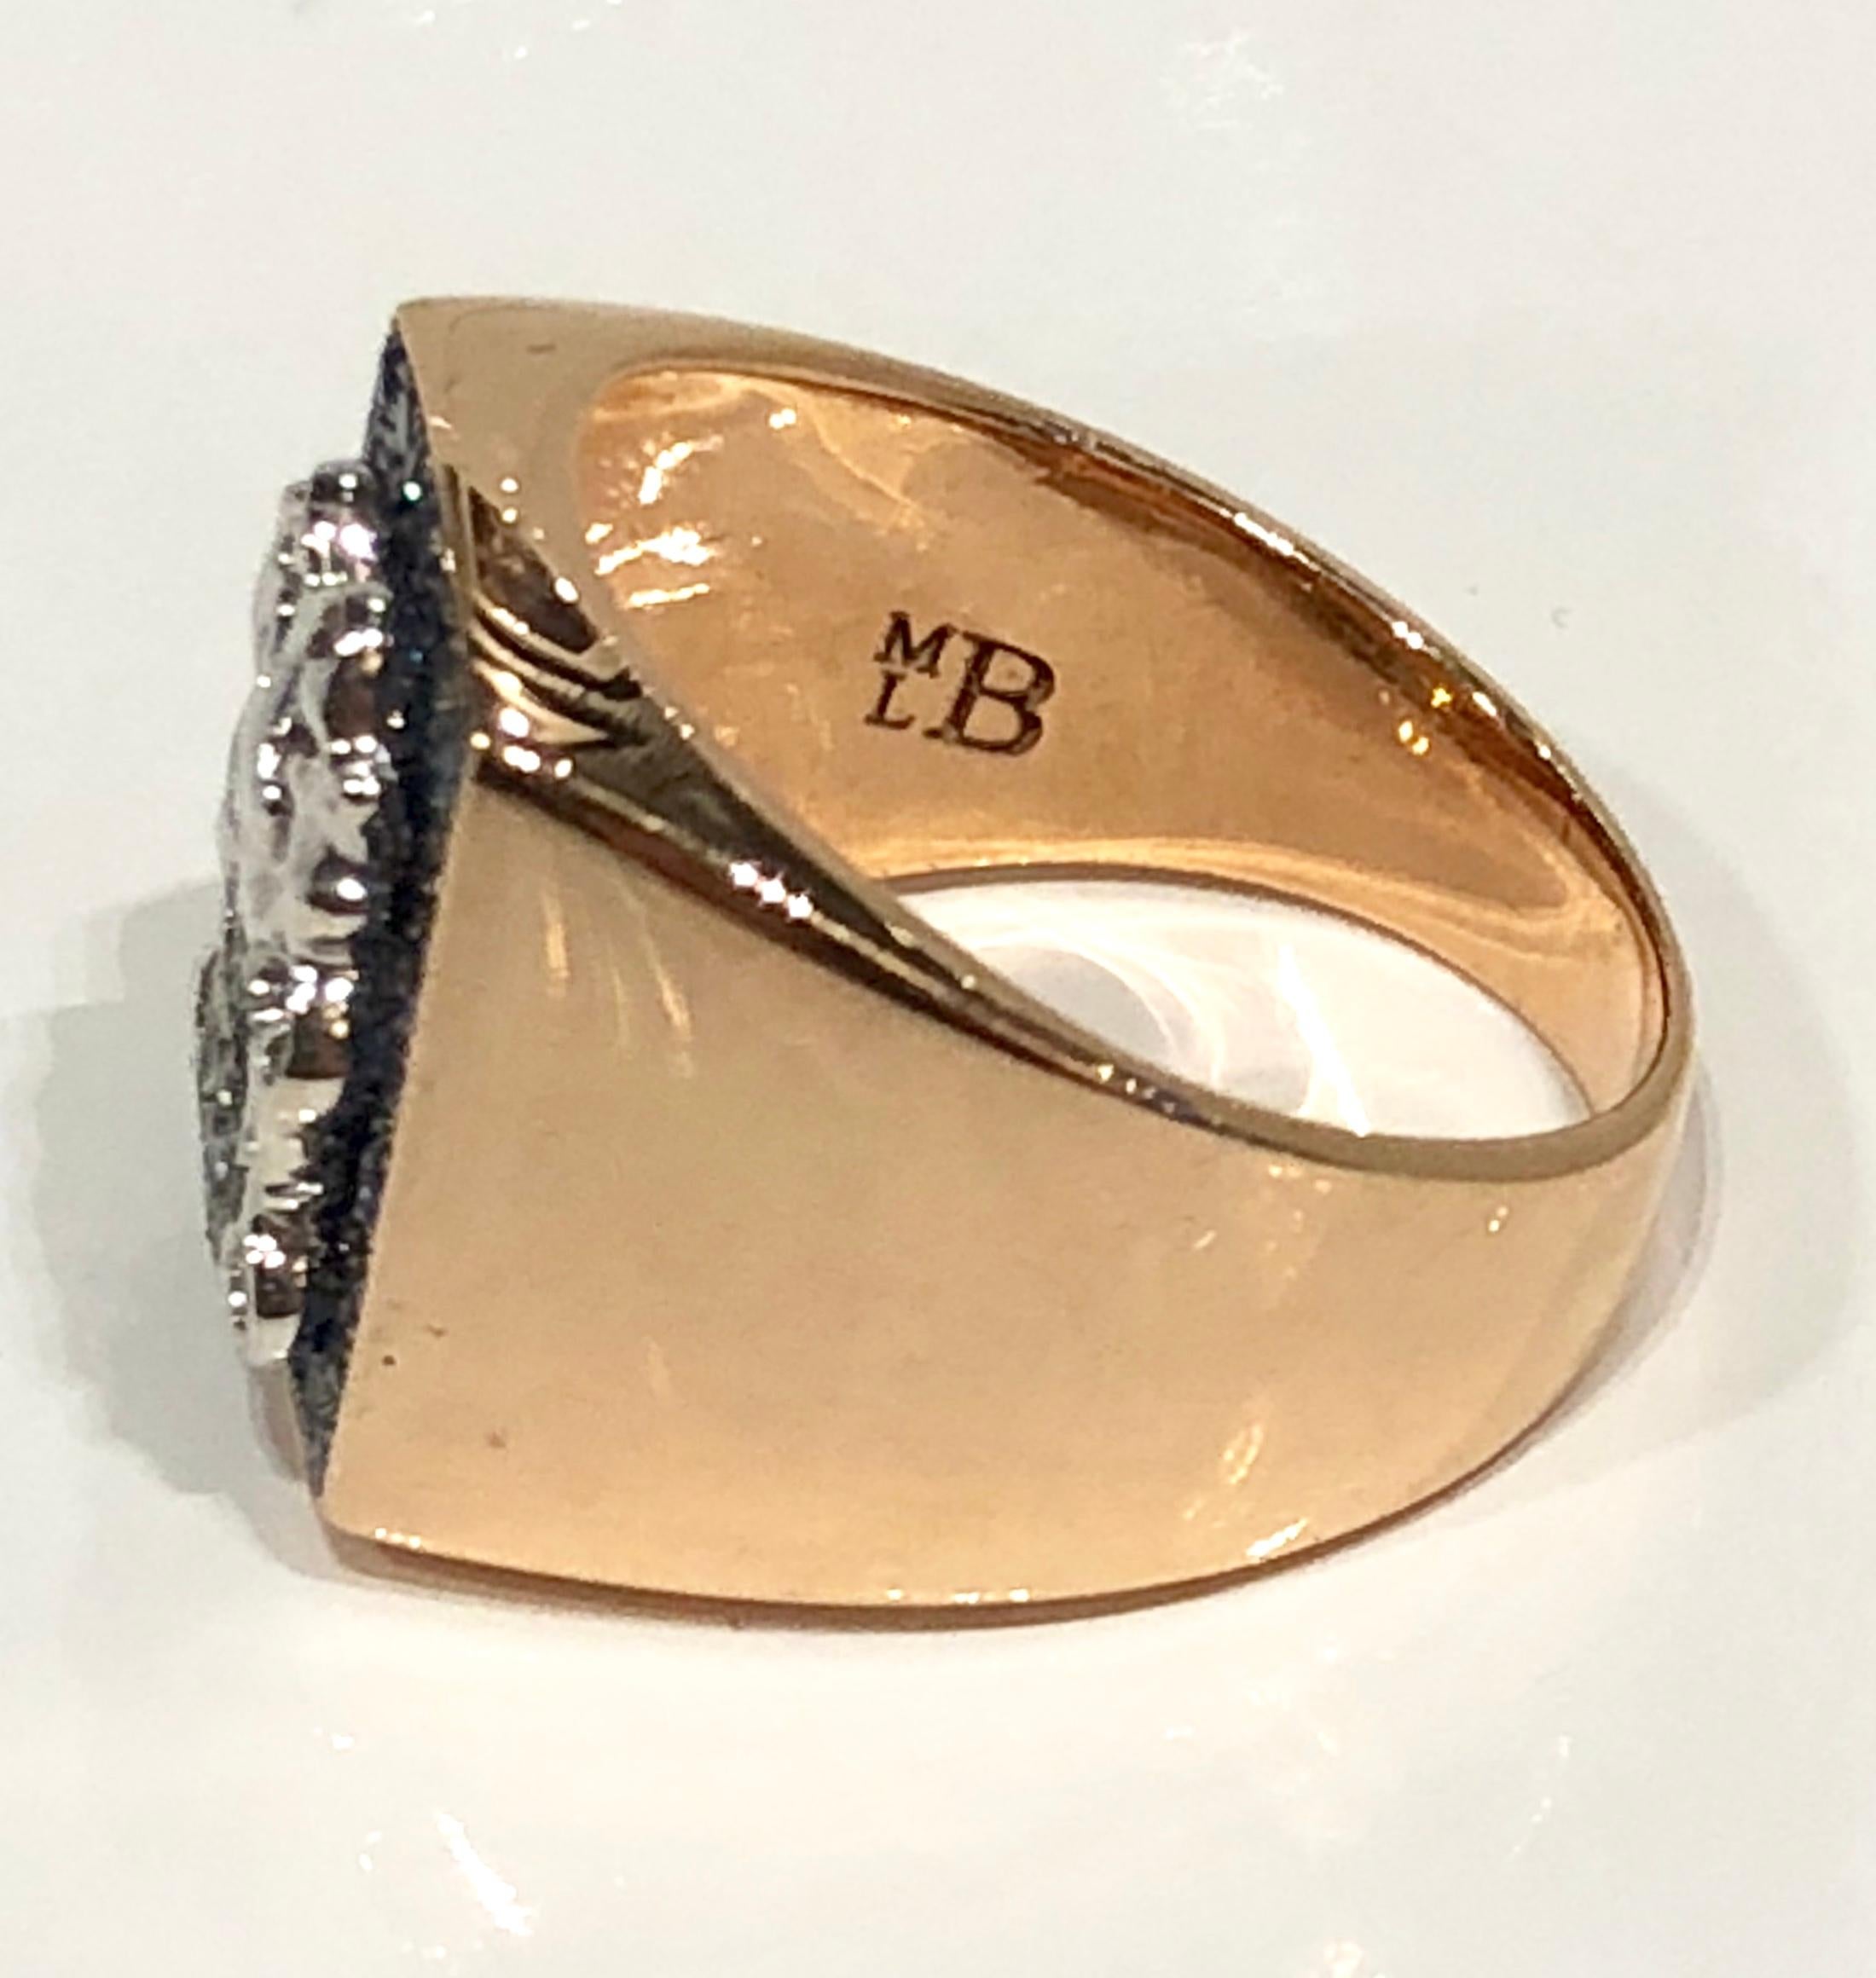 Unisex 18k rose gold Signet Ring, sapphire crown face with white diamond and green tsavorite garnet sheild.
Designed by Martyn Lawrence Bullard
Can be made in any size, lead time 4 weeks